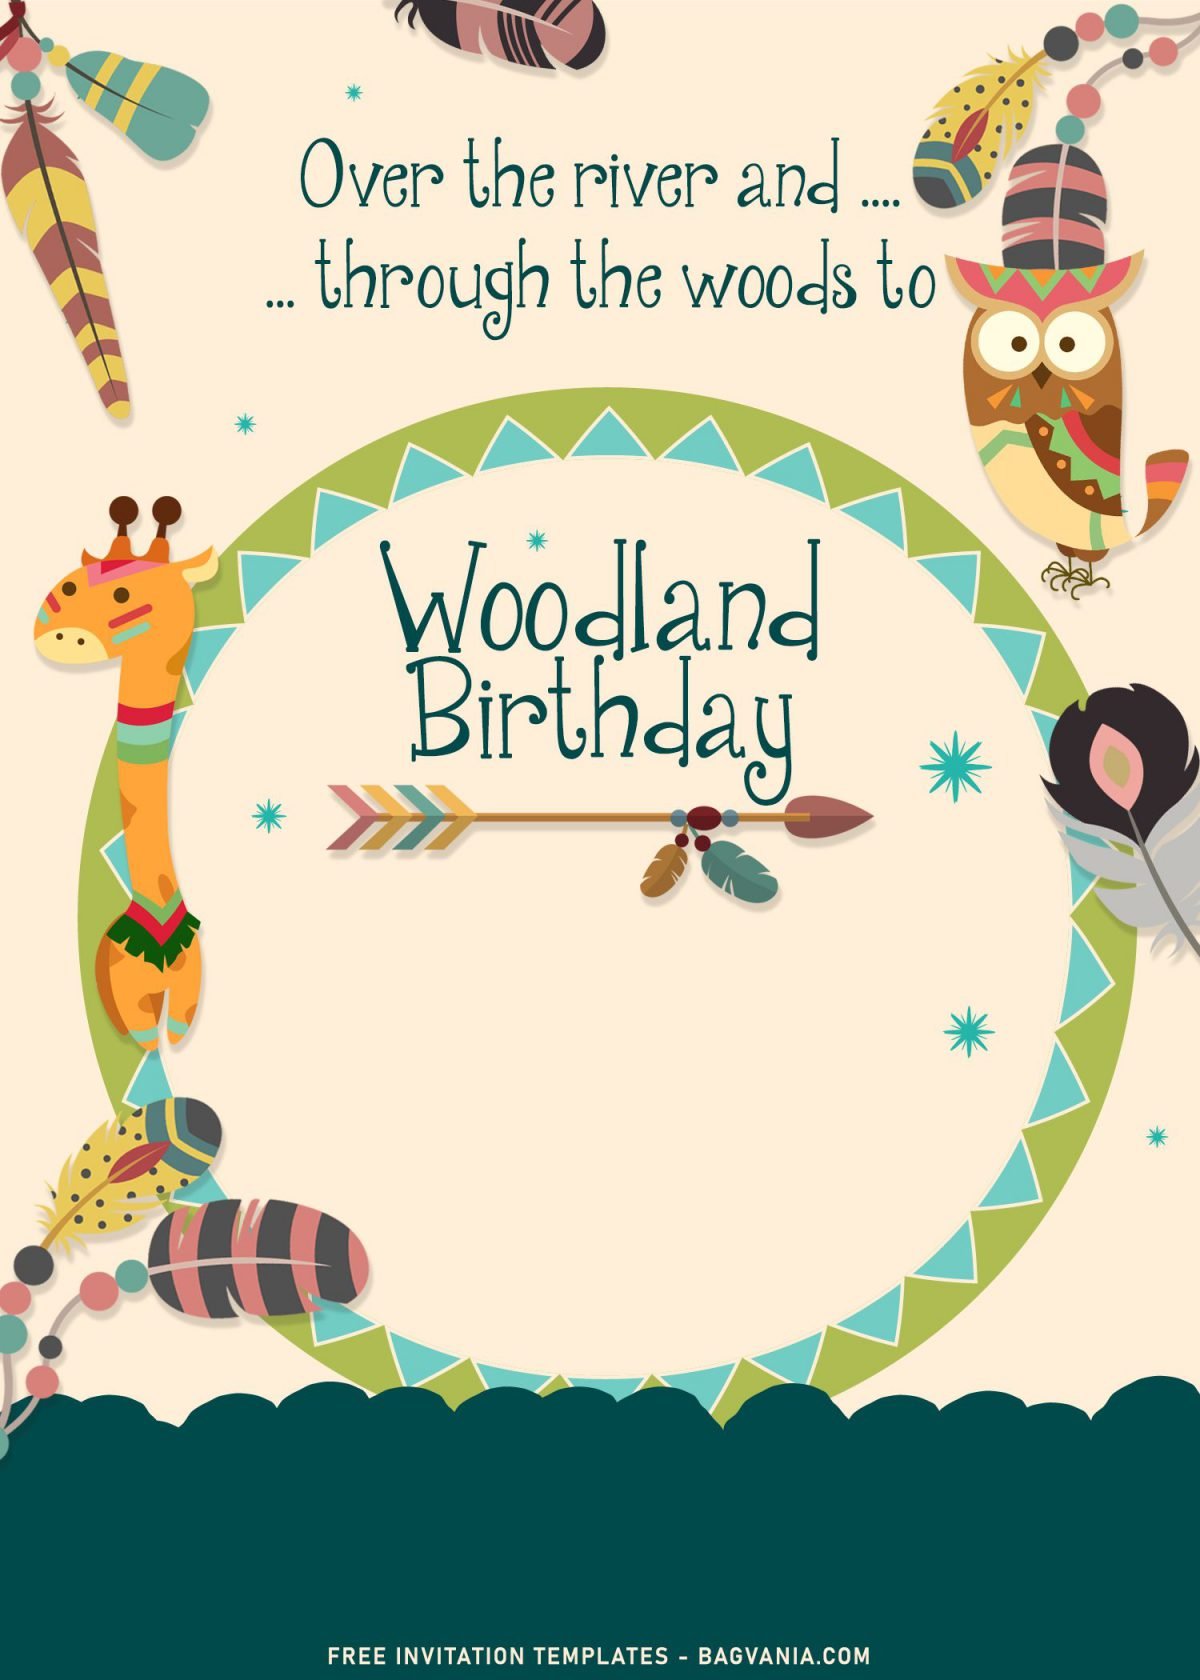 7+ Woodland Birthday Invitation Templates For Your Little Animal Lover Birthday and has baby giraffe